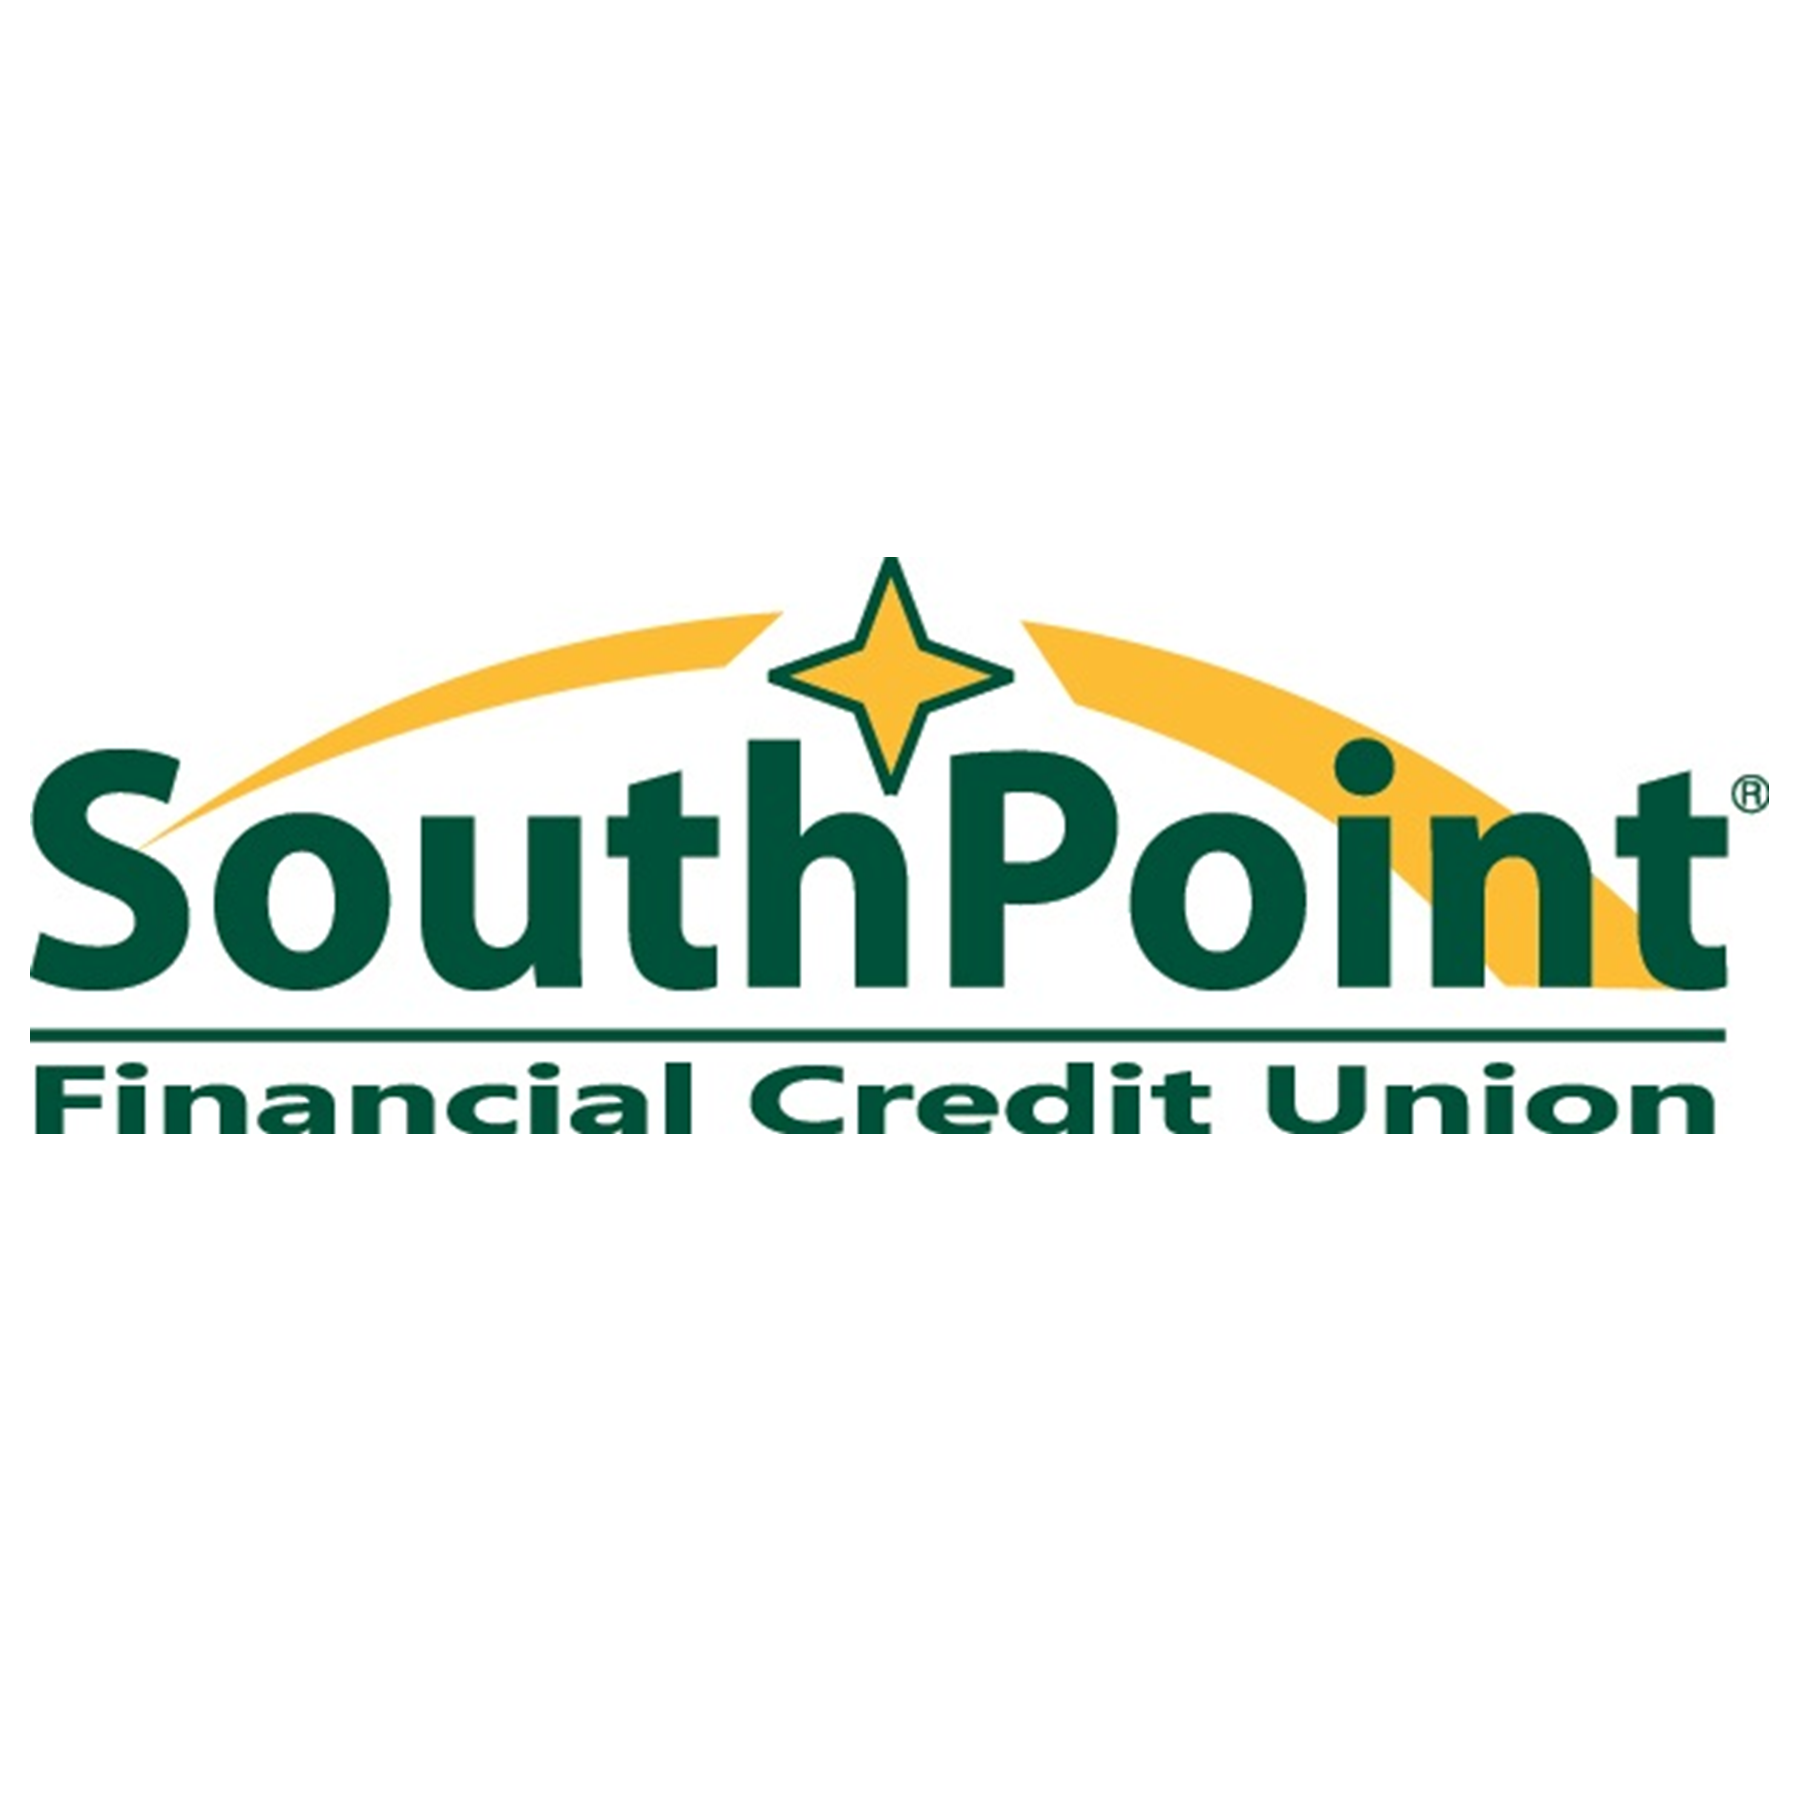 SOUTHPOINT FINANCAIL